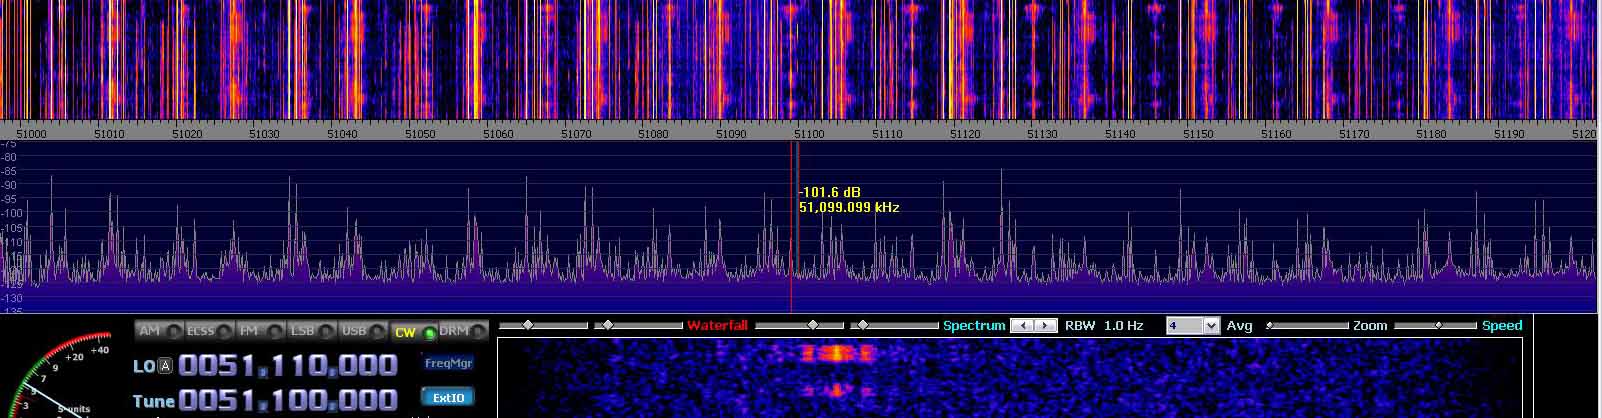 2014-07-04 51.100 MHz +- 100 kHz - Strong Es - 4-el dipole array with ends to St P - (c) OH7HJ.JPG